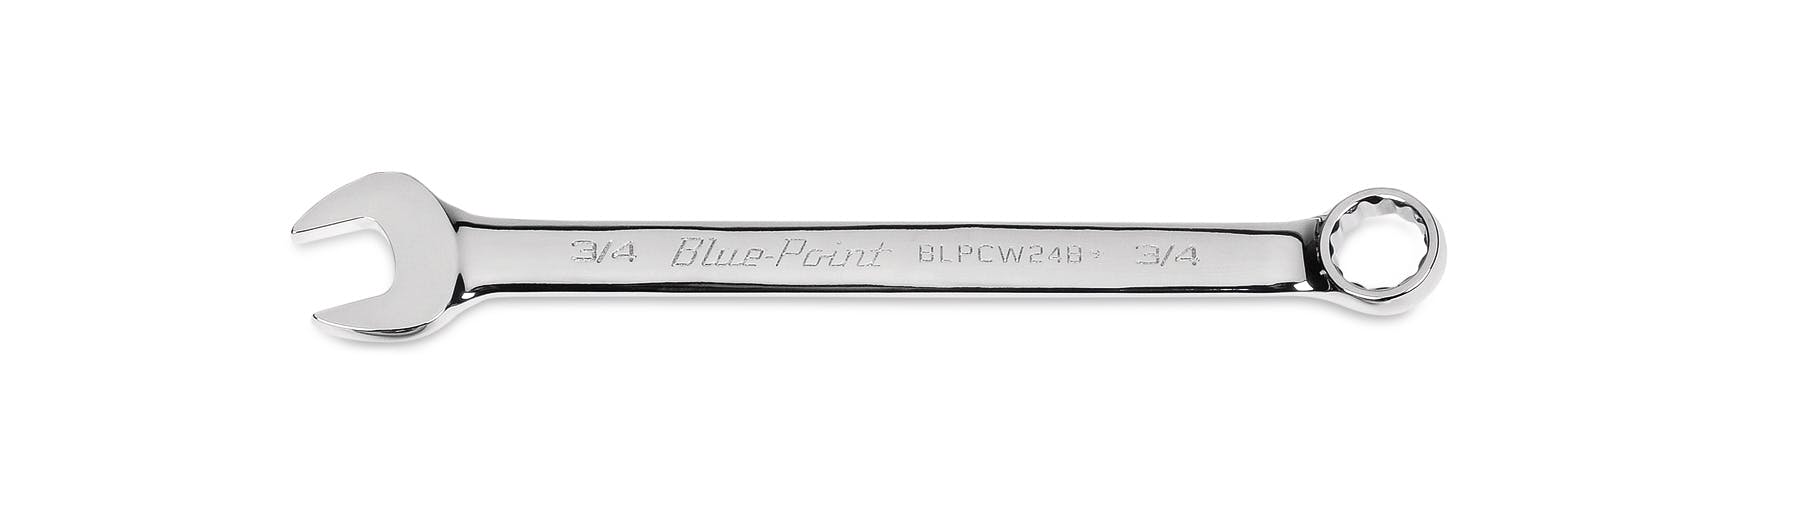 New Blue-Point 3/4 to 2 Adjustable Hook Spanner Wrench AHS300B